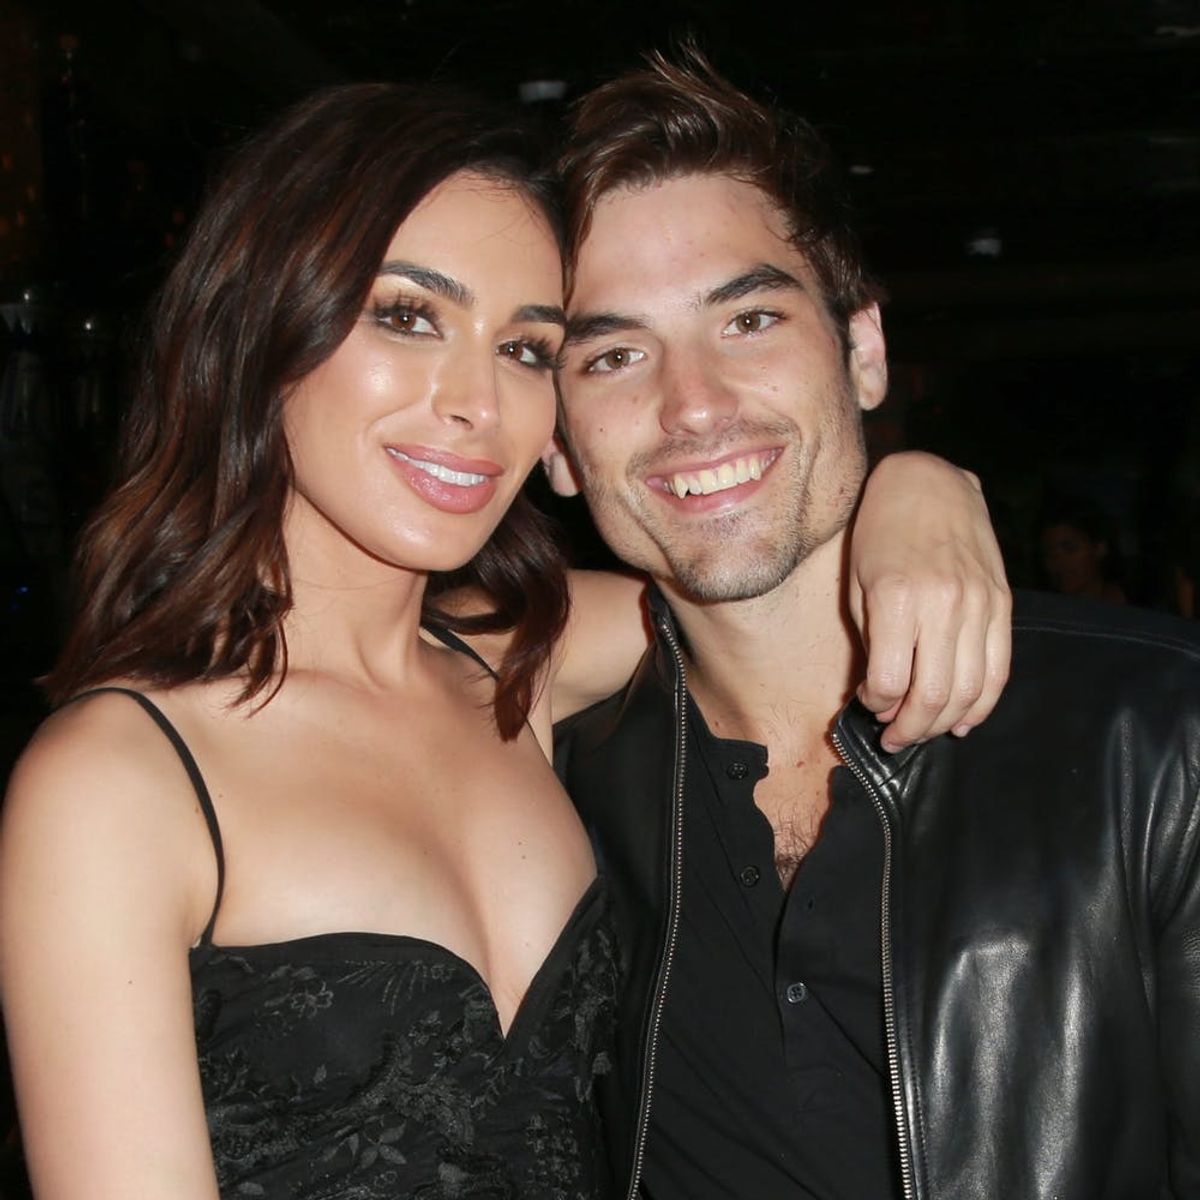 Bachelor Nation’s Ashley Iaconetti and Jared Haibon Are Happily Dating 3 Years After Meeting on ‘BIP’